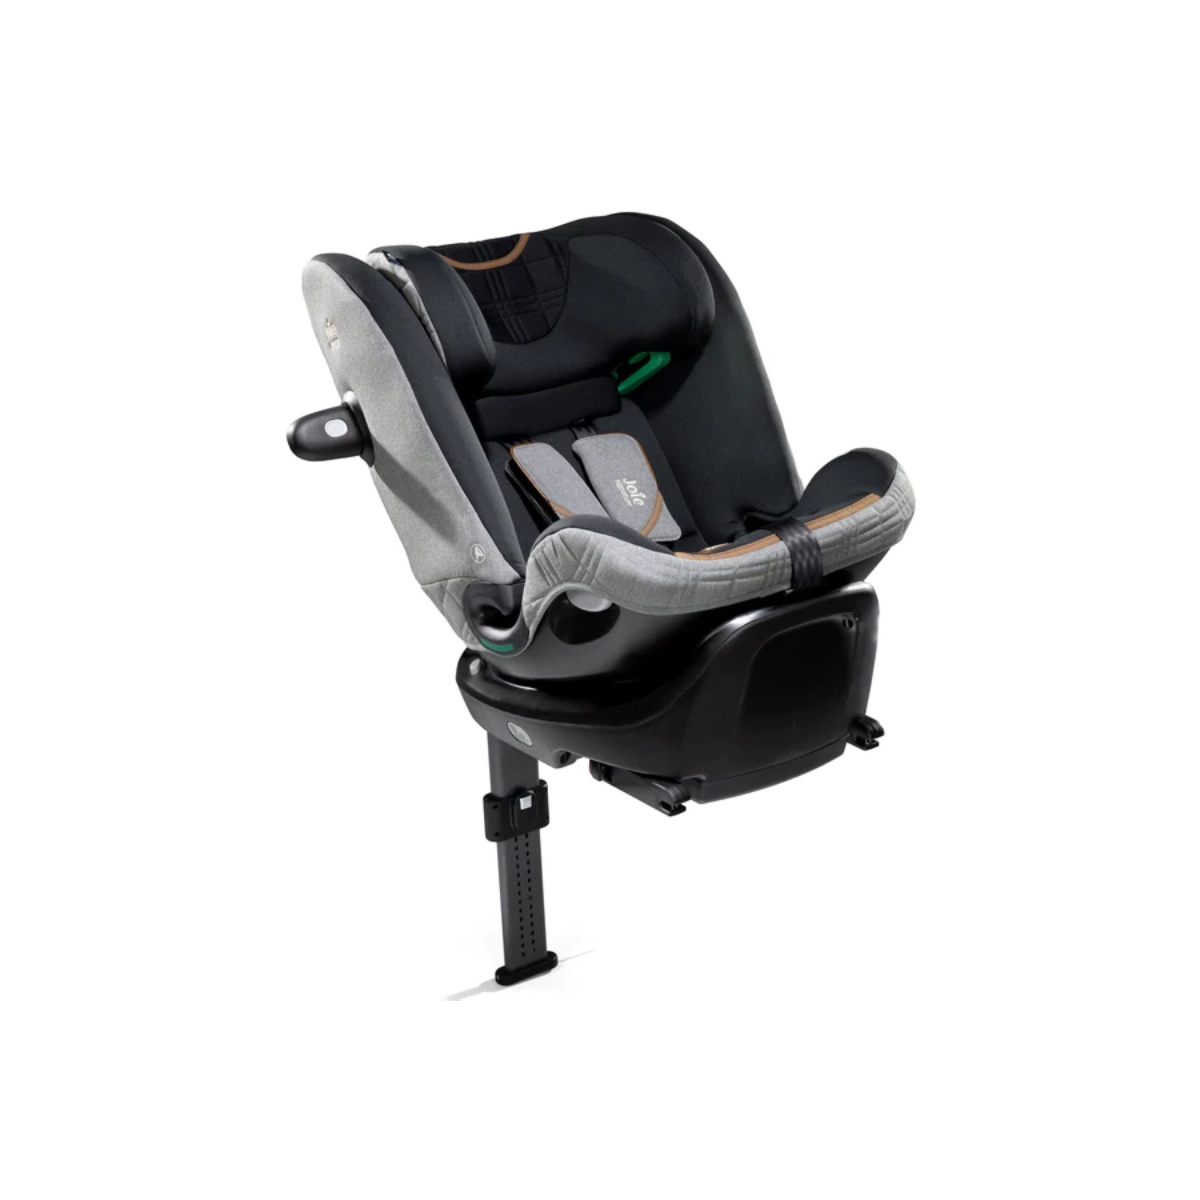 Joie i-Spin XL Signature Group 0+/1/2/3 Car Seat